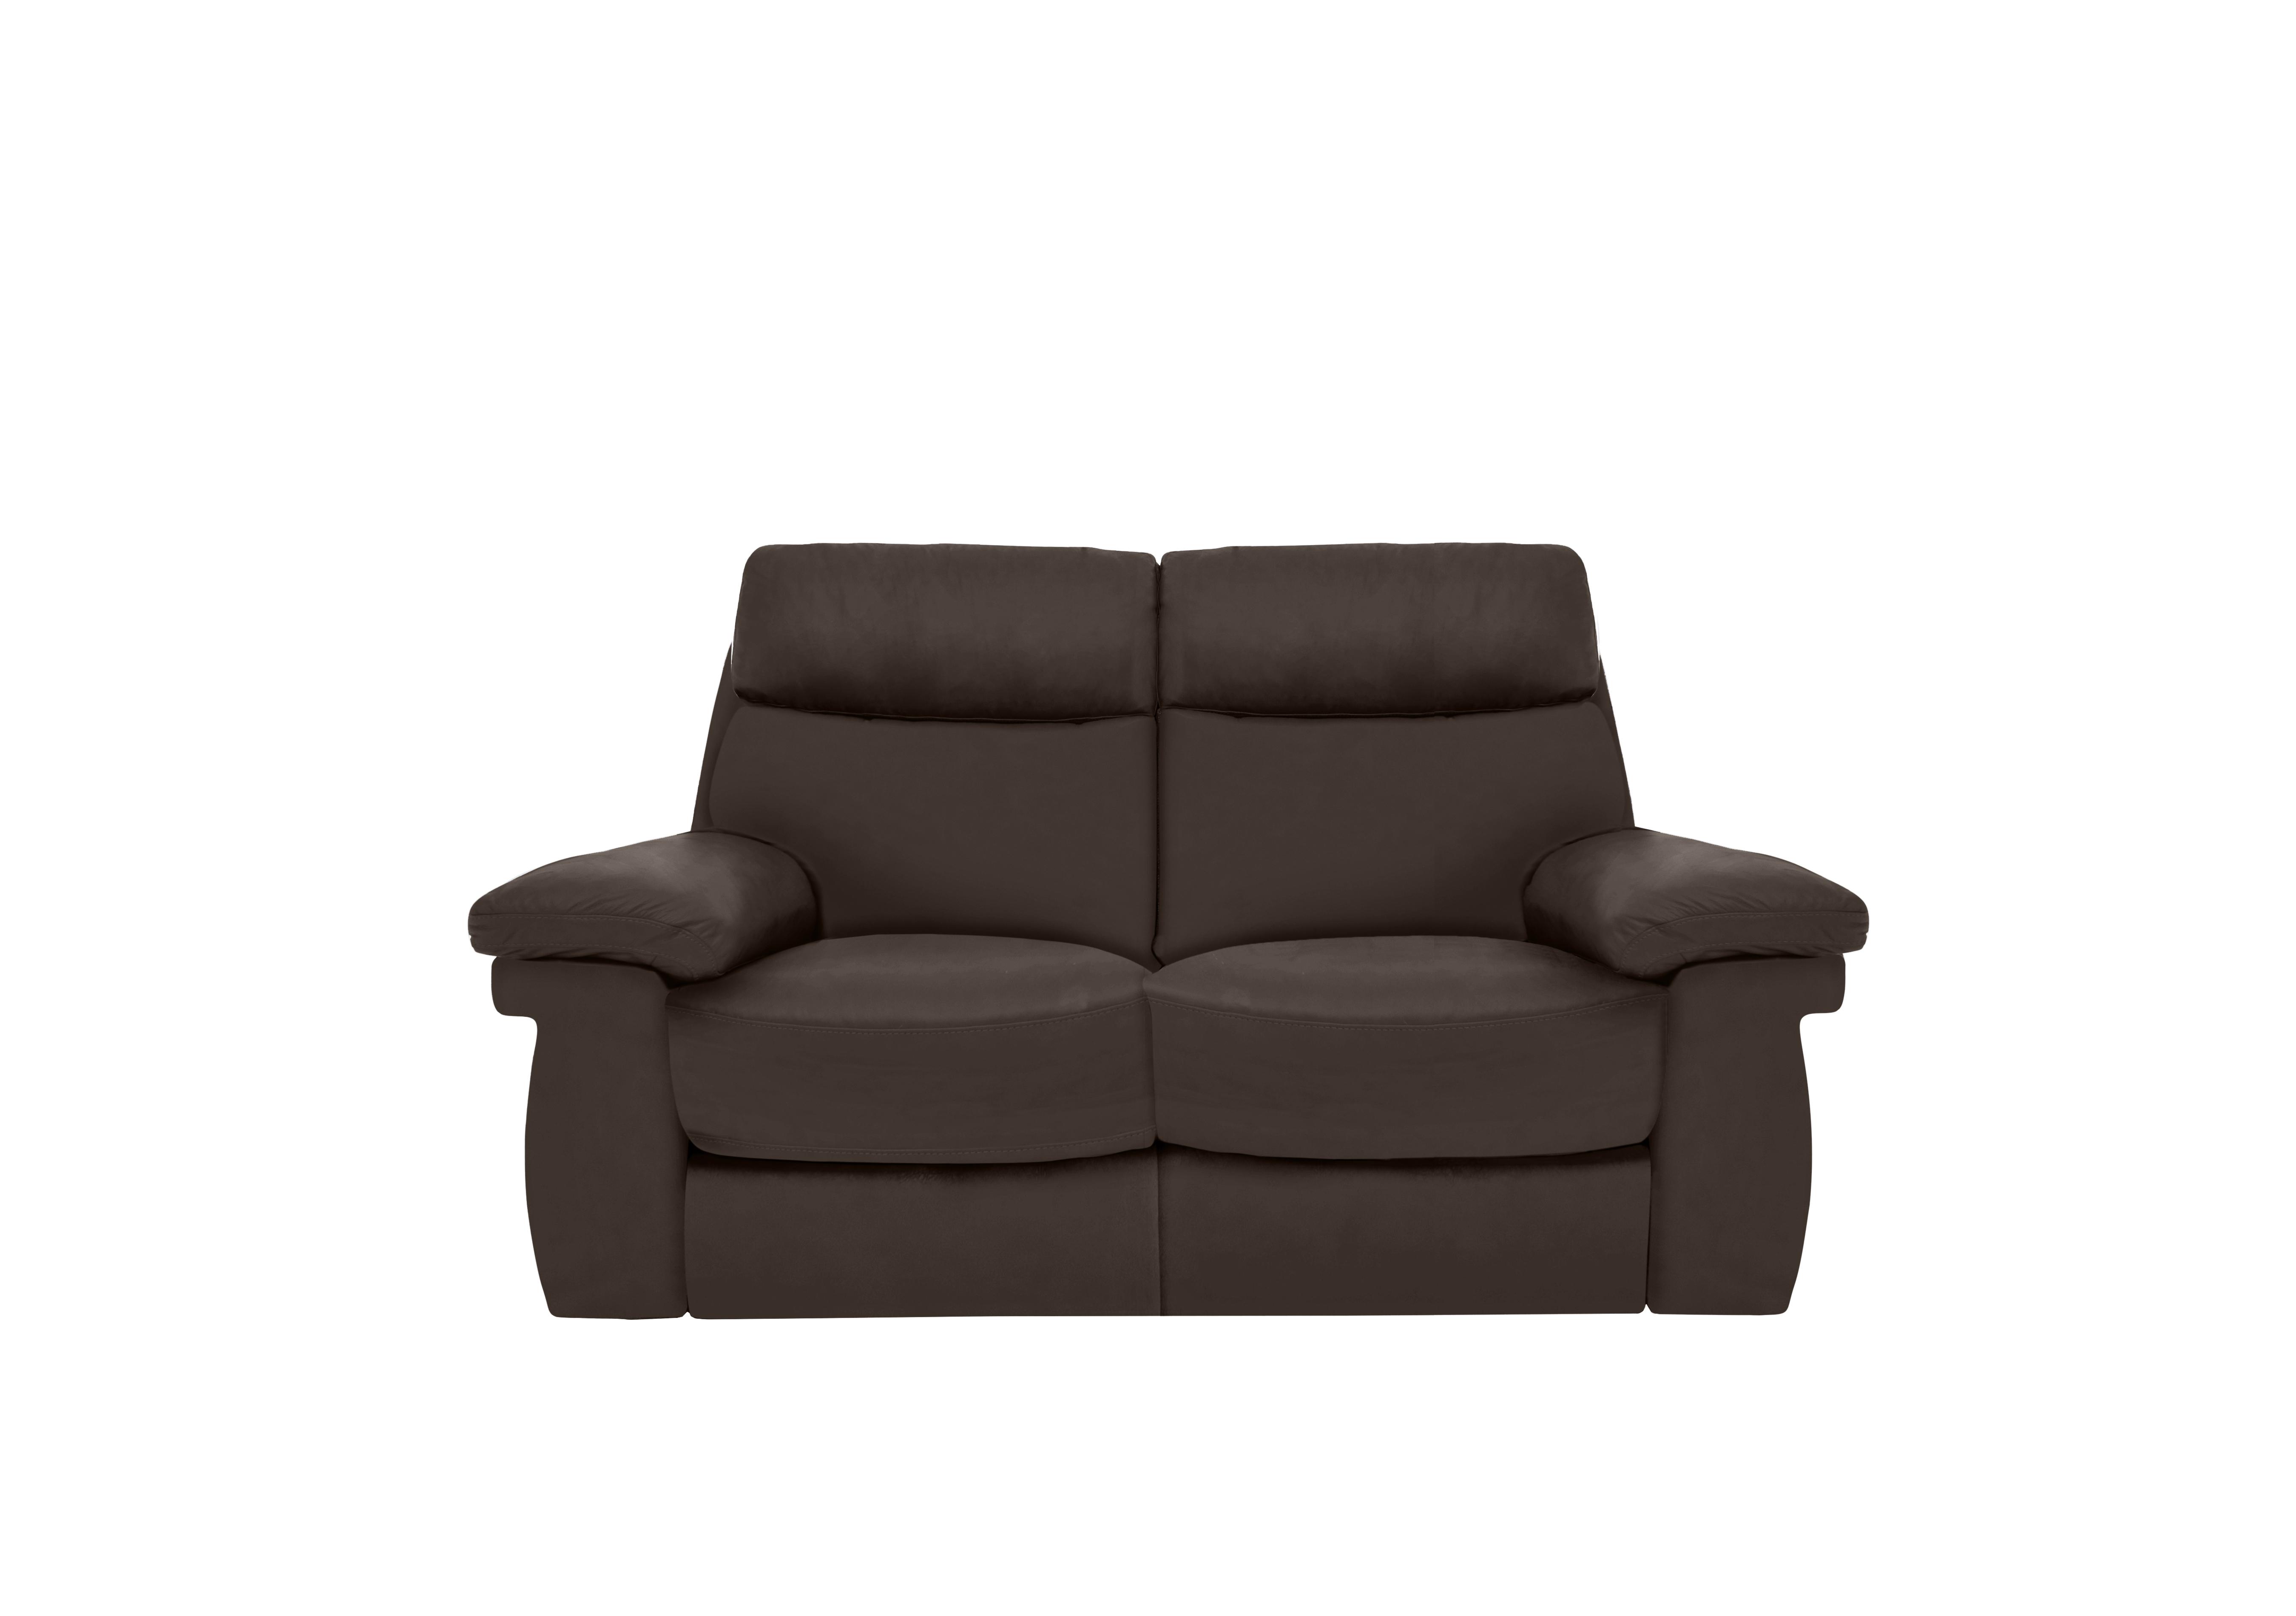 Serene 2 Seater Leather Power Recliner Sofa with Power Headrests and Power Lumbar in Bx-037c Walnut on Furniture Village